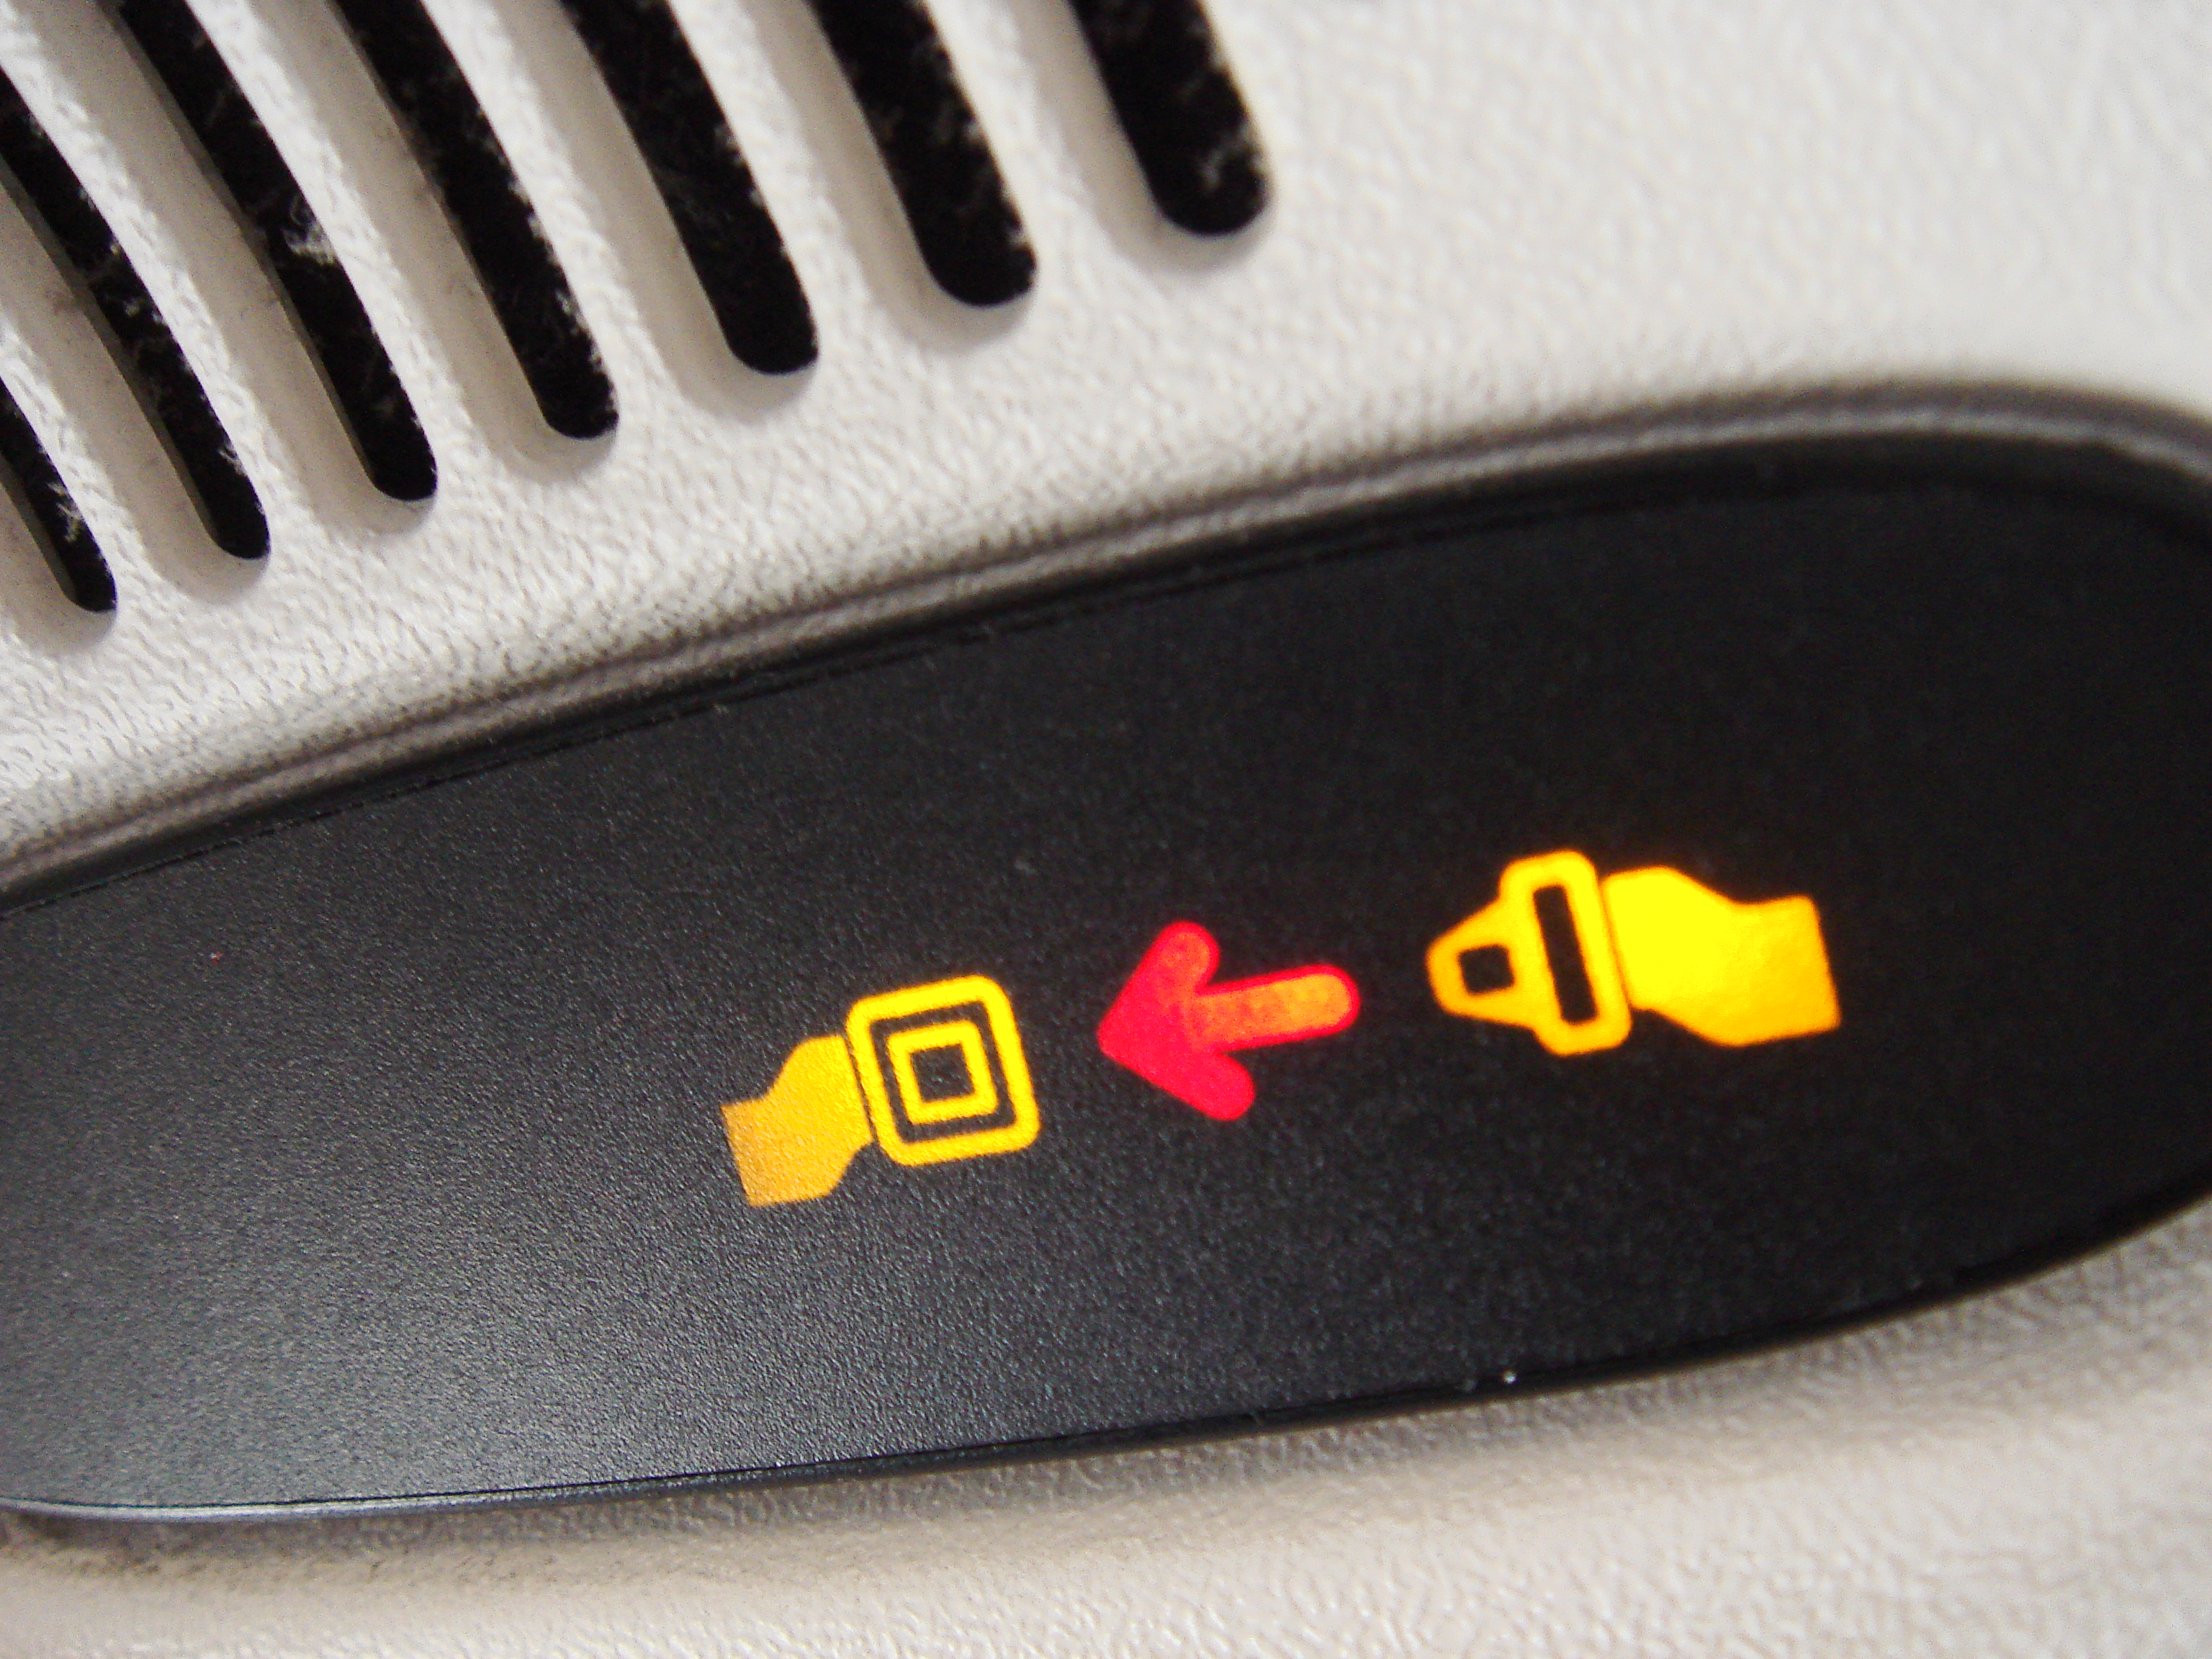 Is It Illegal To Get Up When The 'Fasten Seat Belt' Sign Is On?